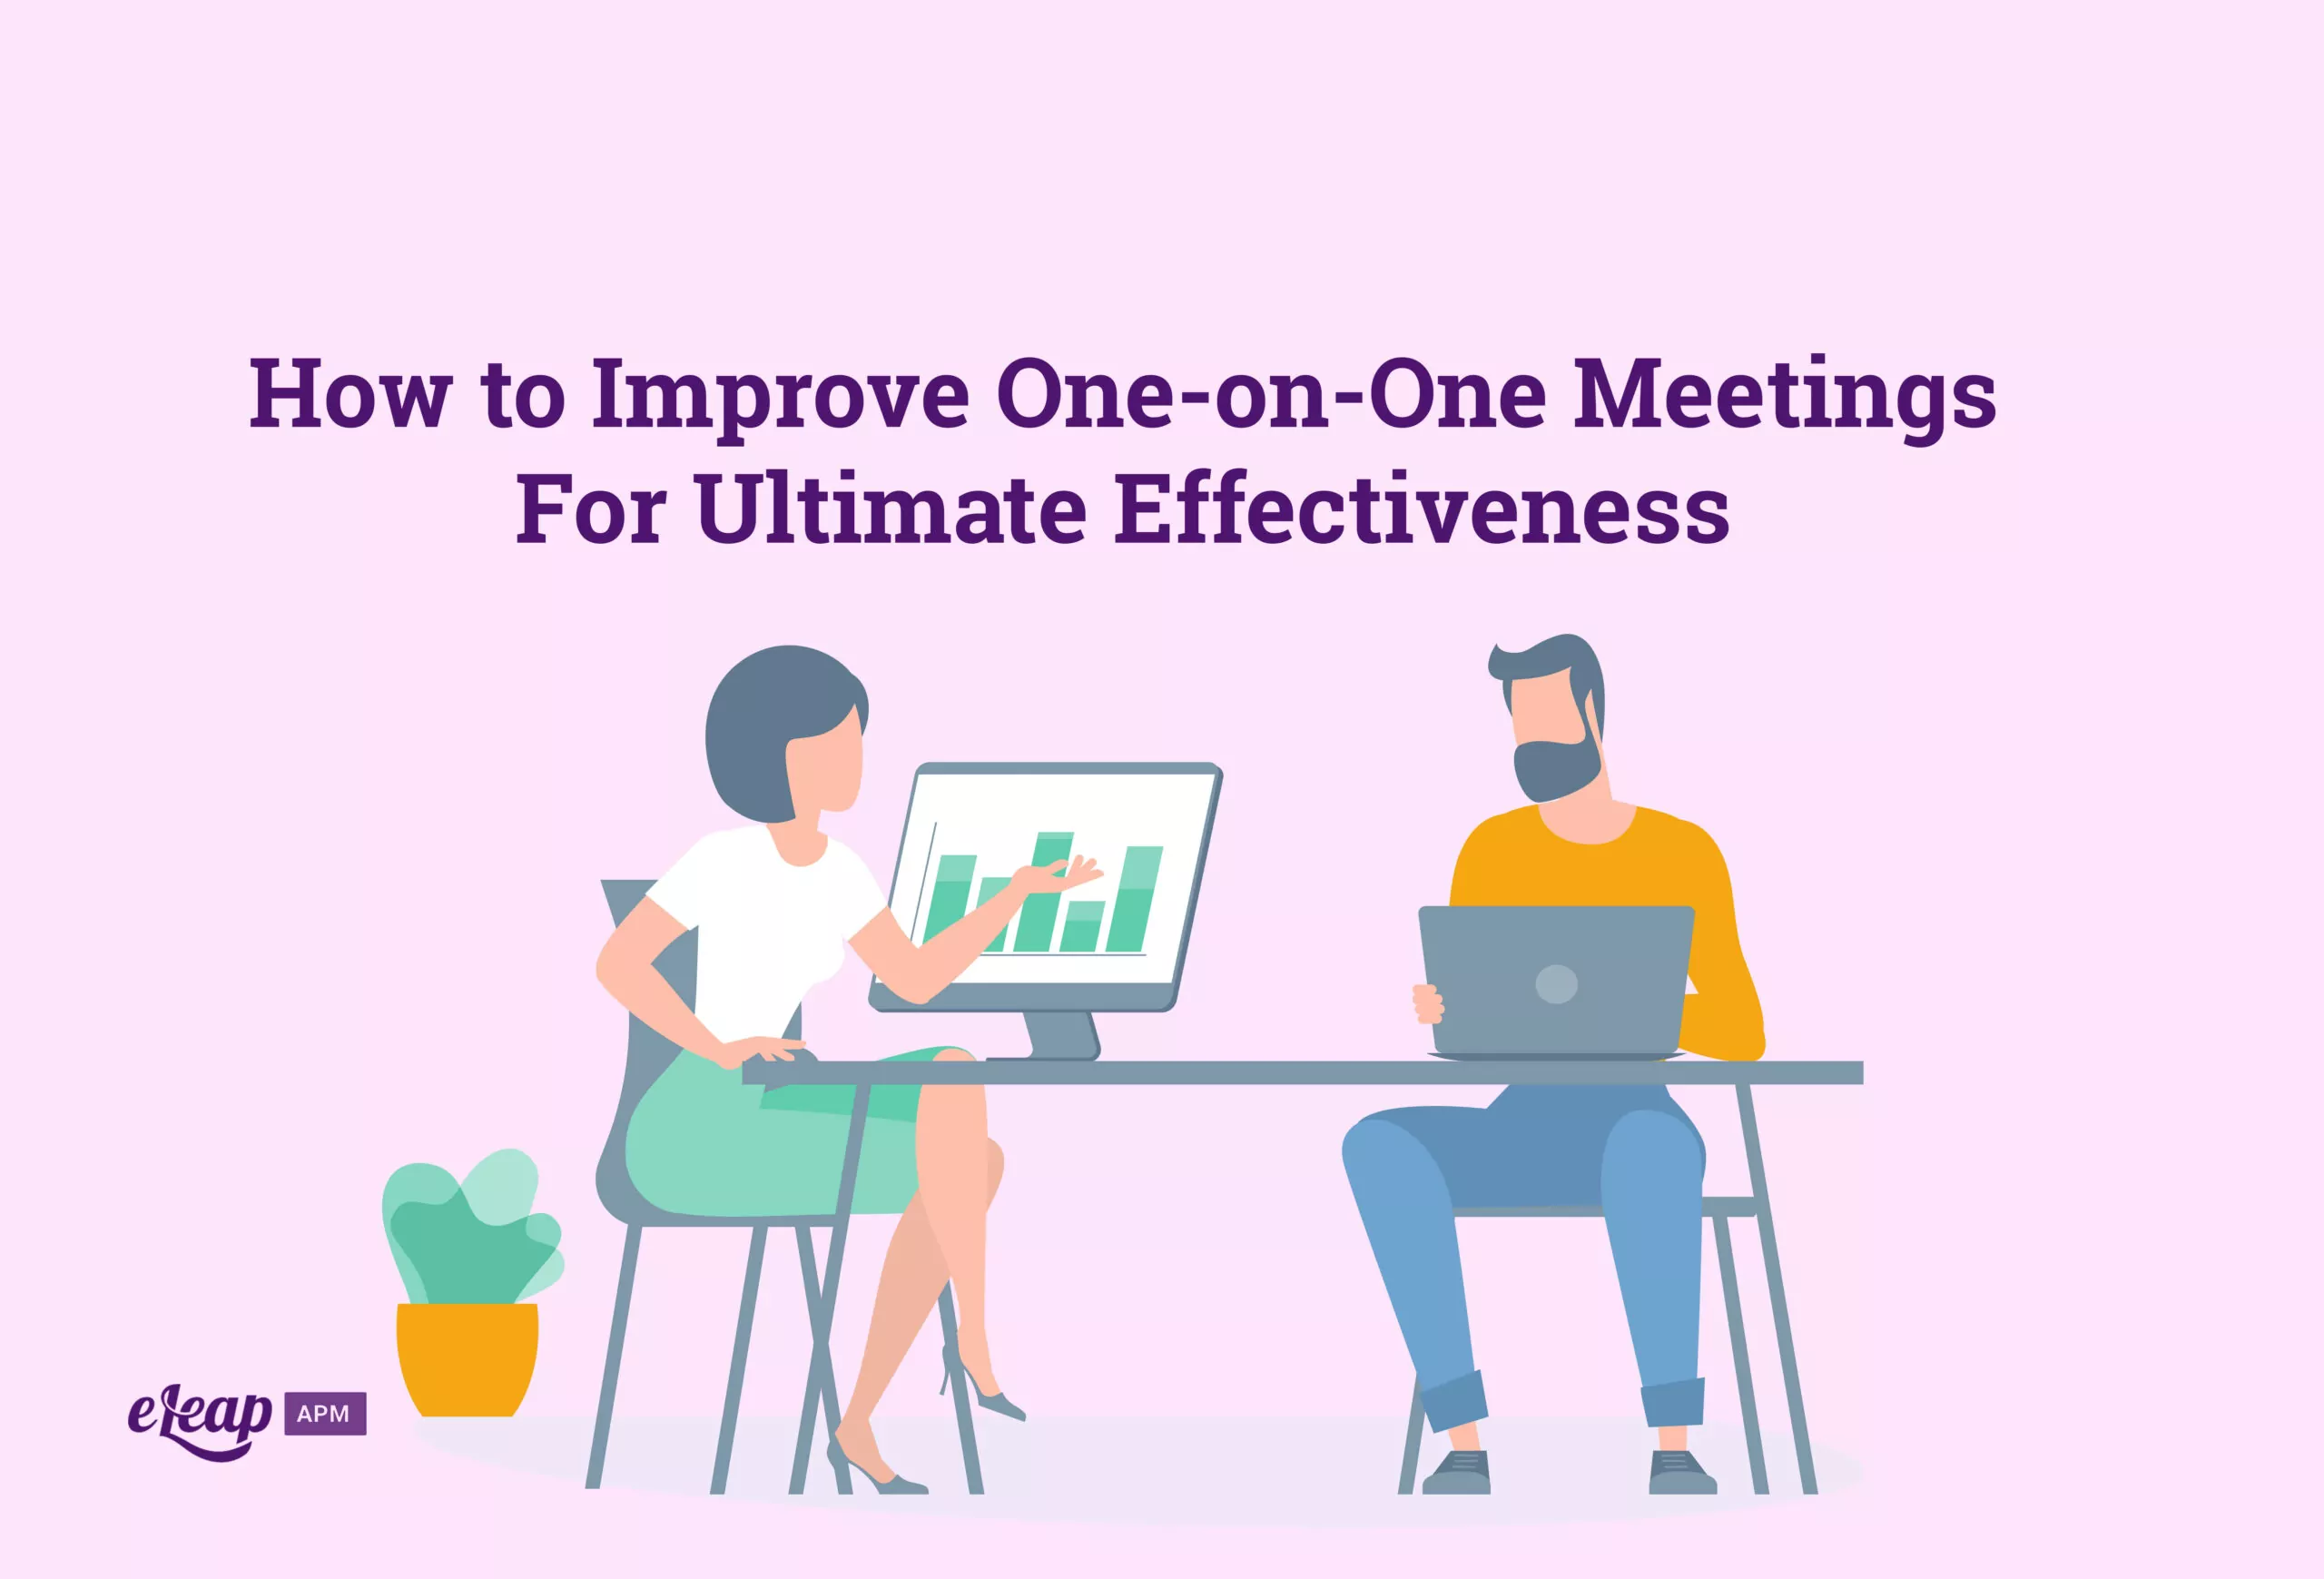 How to Improve One-on-One Meetings For Ultimate Effectiveness